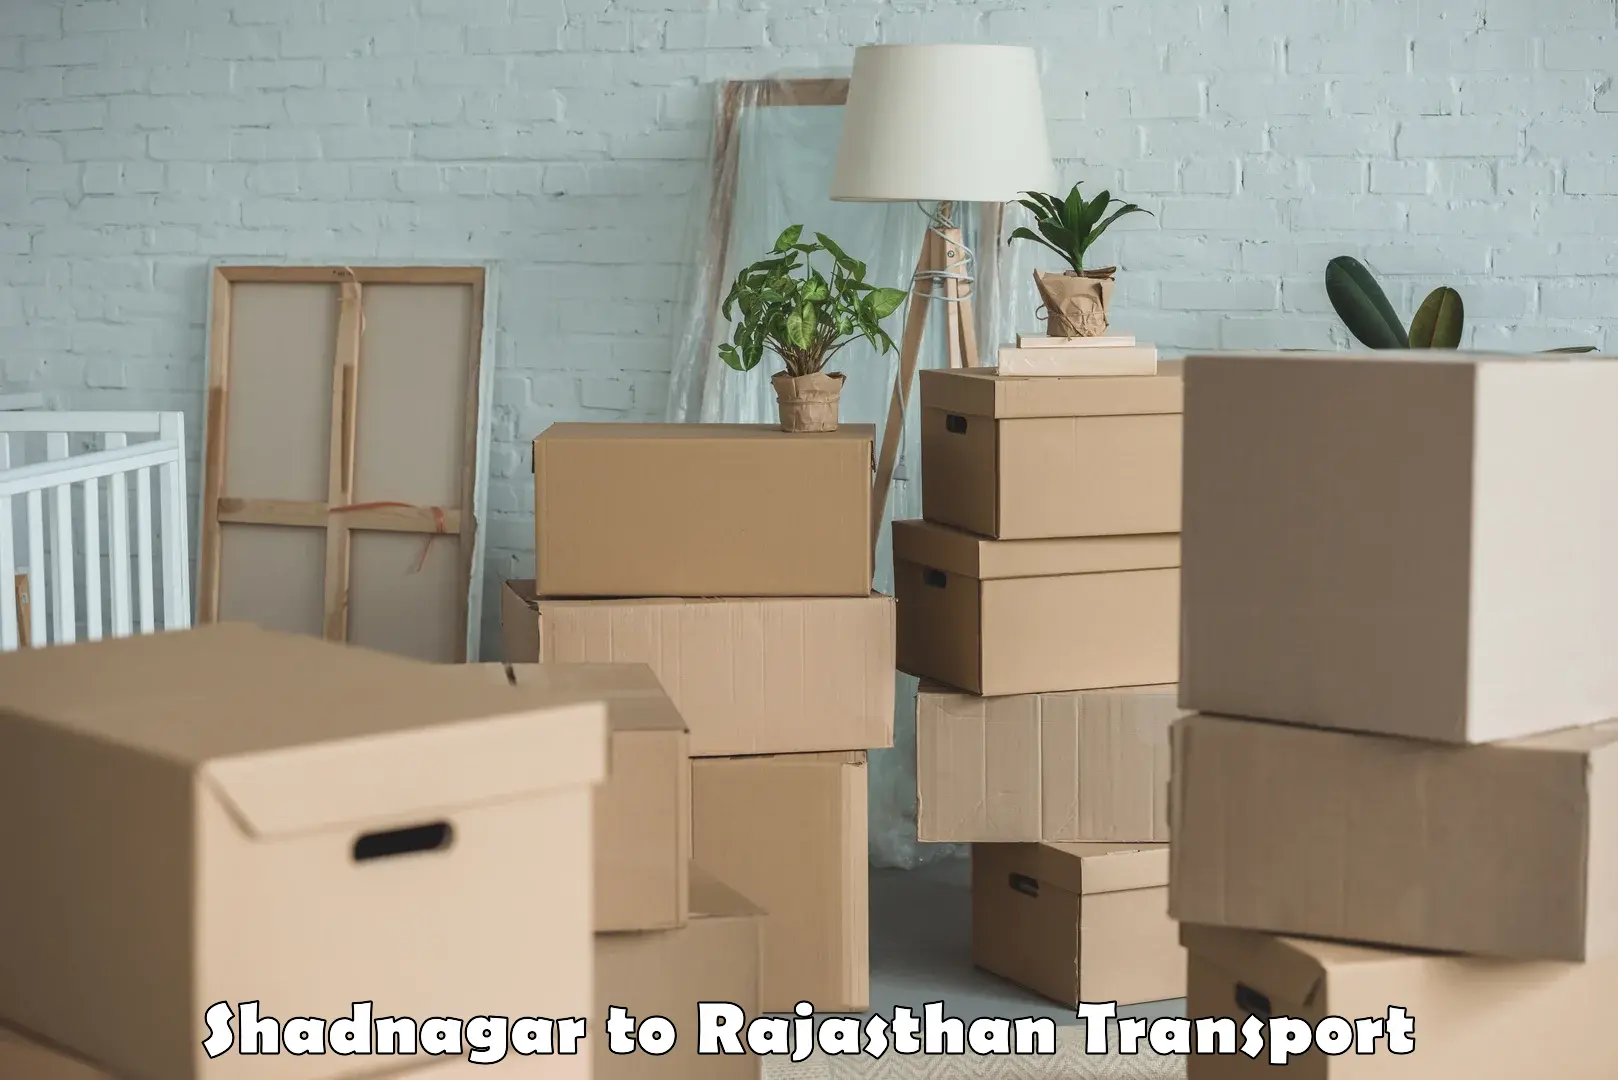 Truck transport companies in India Shadnagar to Rajasthan